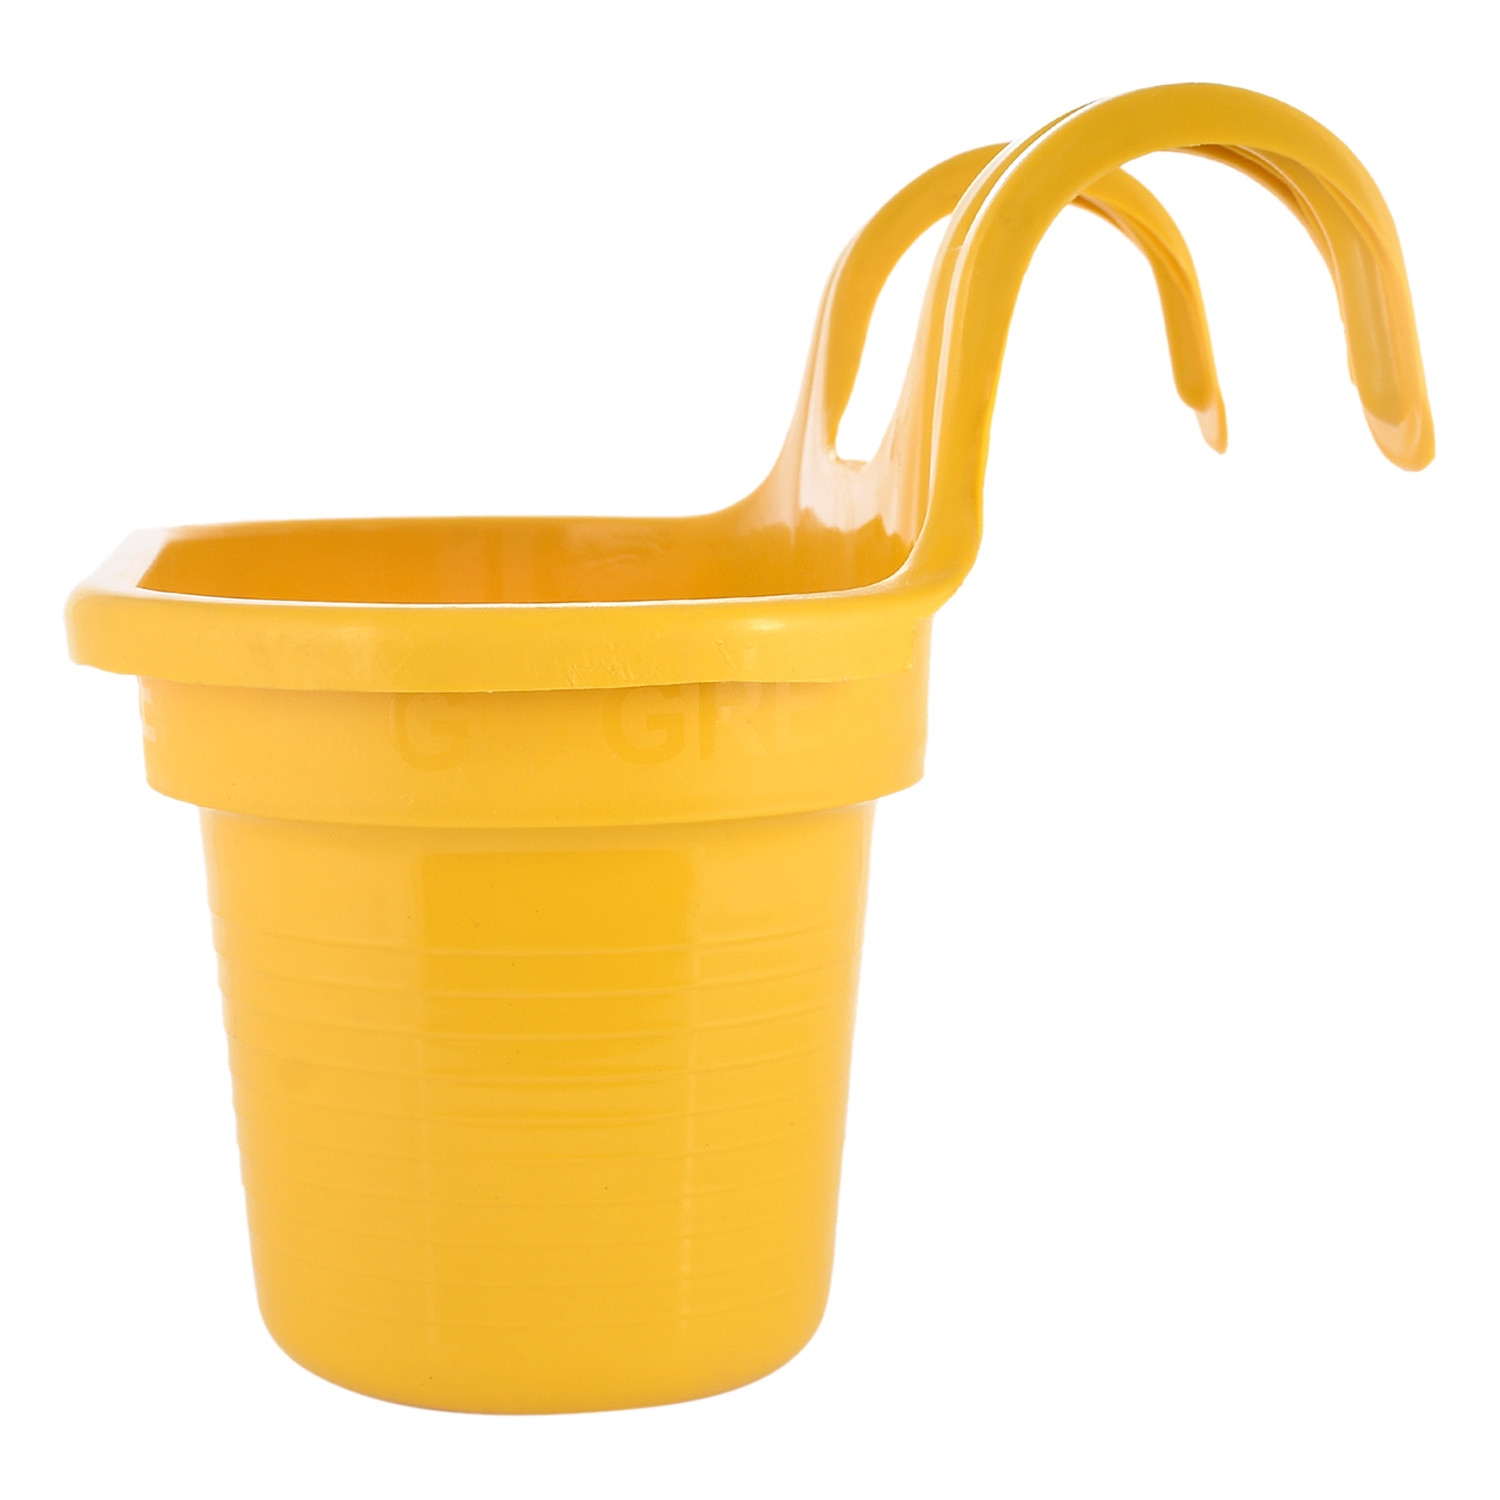 Kuber Industries Hanging Flower Pot|Double Hook Plant Container|Durable Plastic Glossy Finish Pots for Home|Balcony|Garden|12 Inch|Pack of 2 (Yellow & Red)